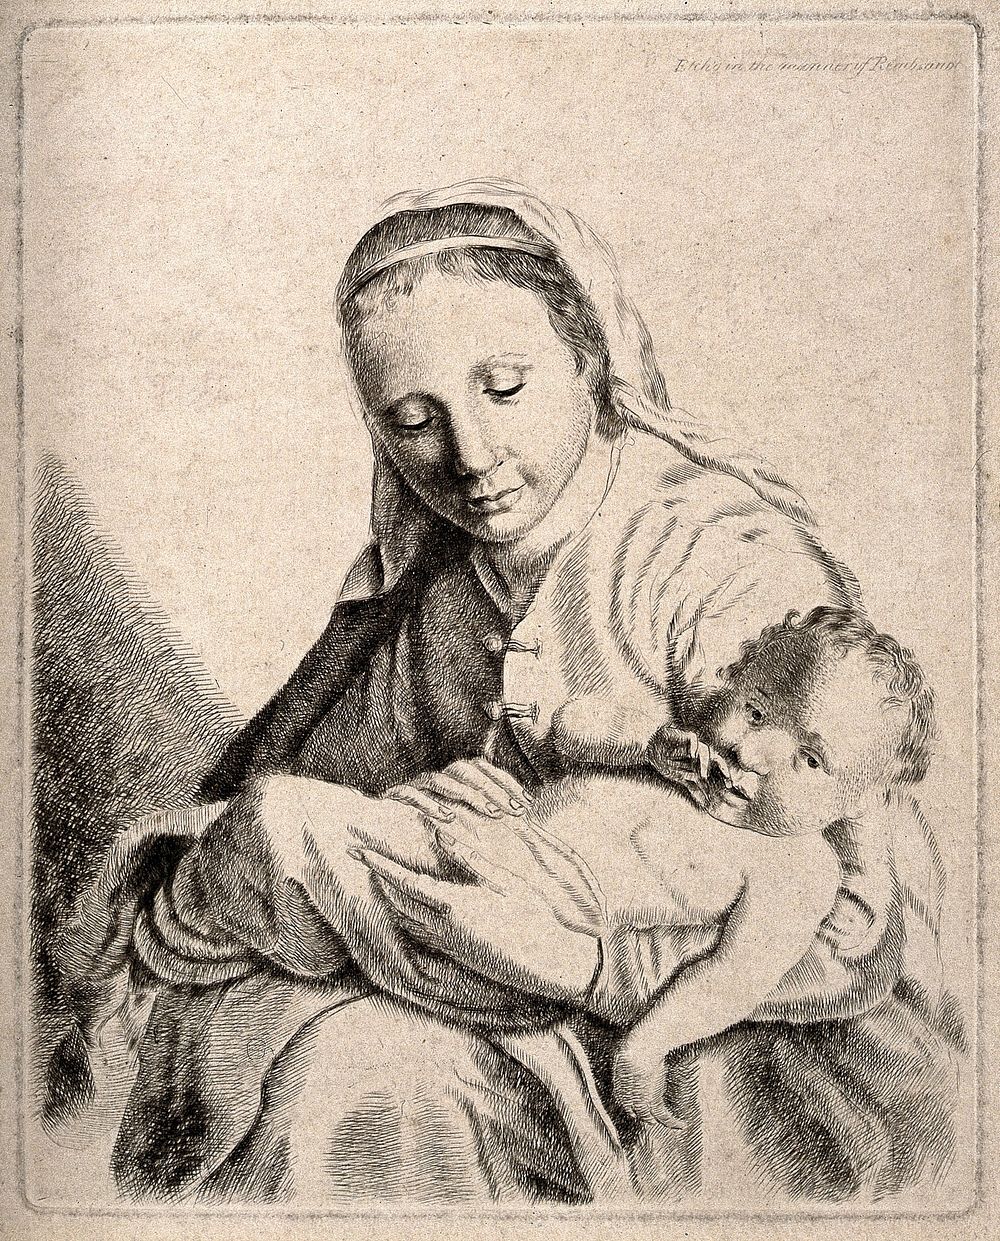 A woman lovingly holding her baby. Etching.